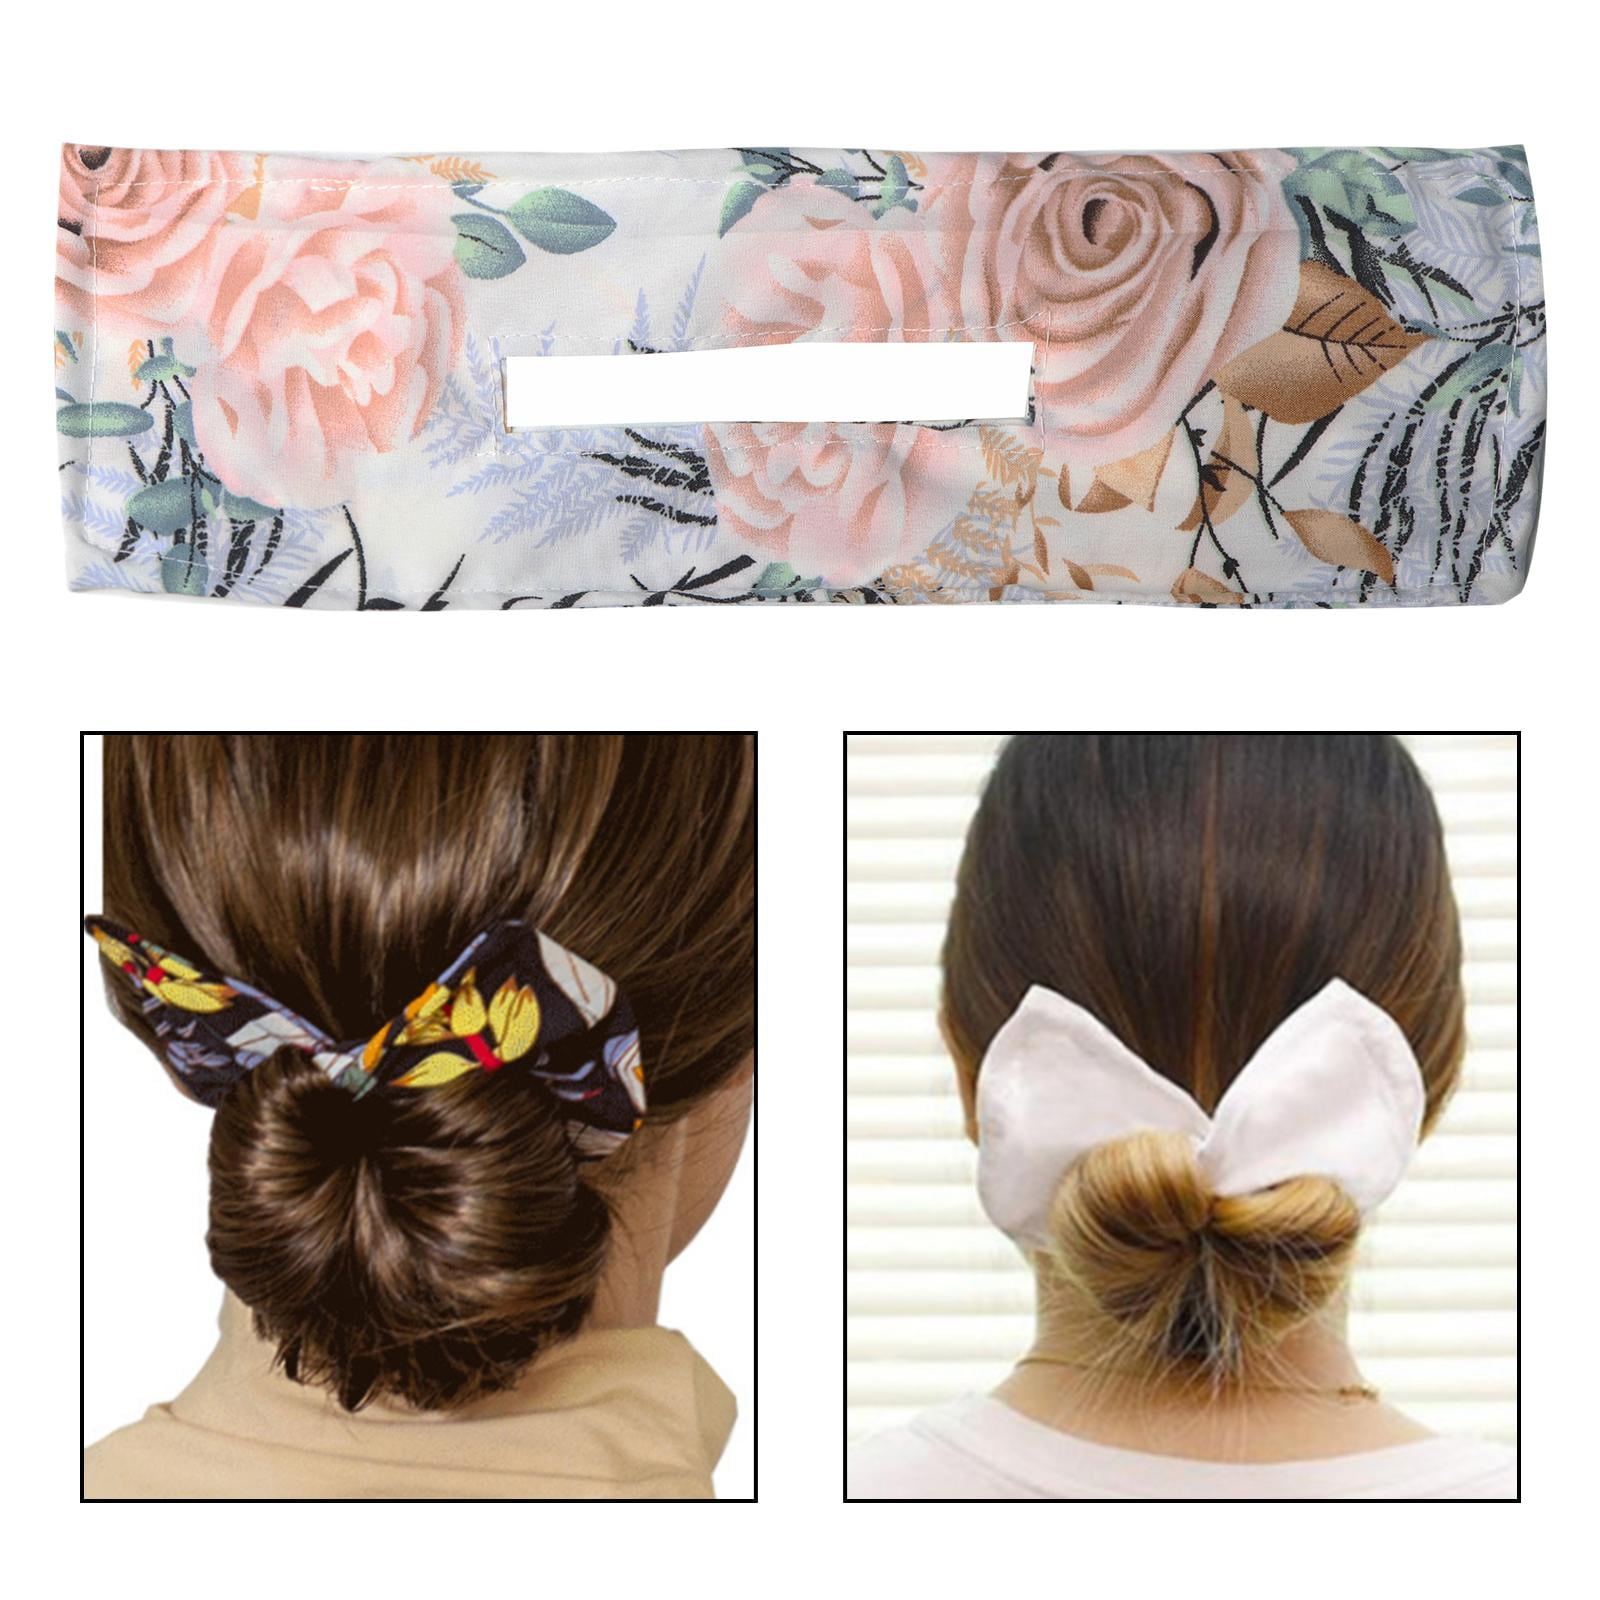 Butterfly Bun Hairstyle - Stylish Life for Moms